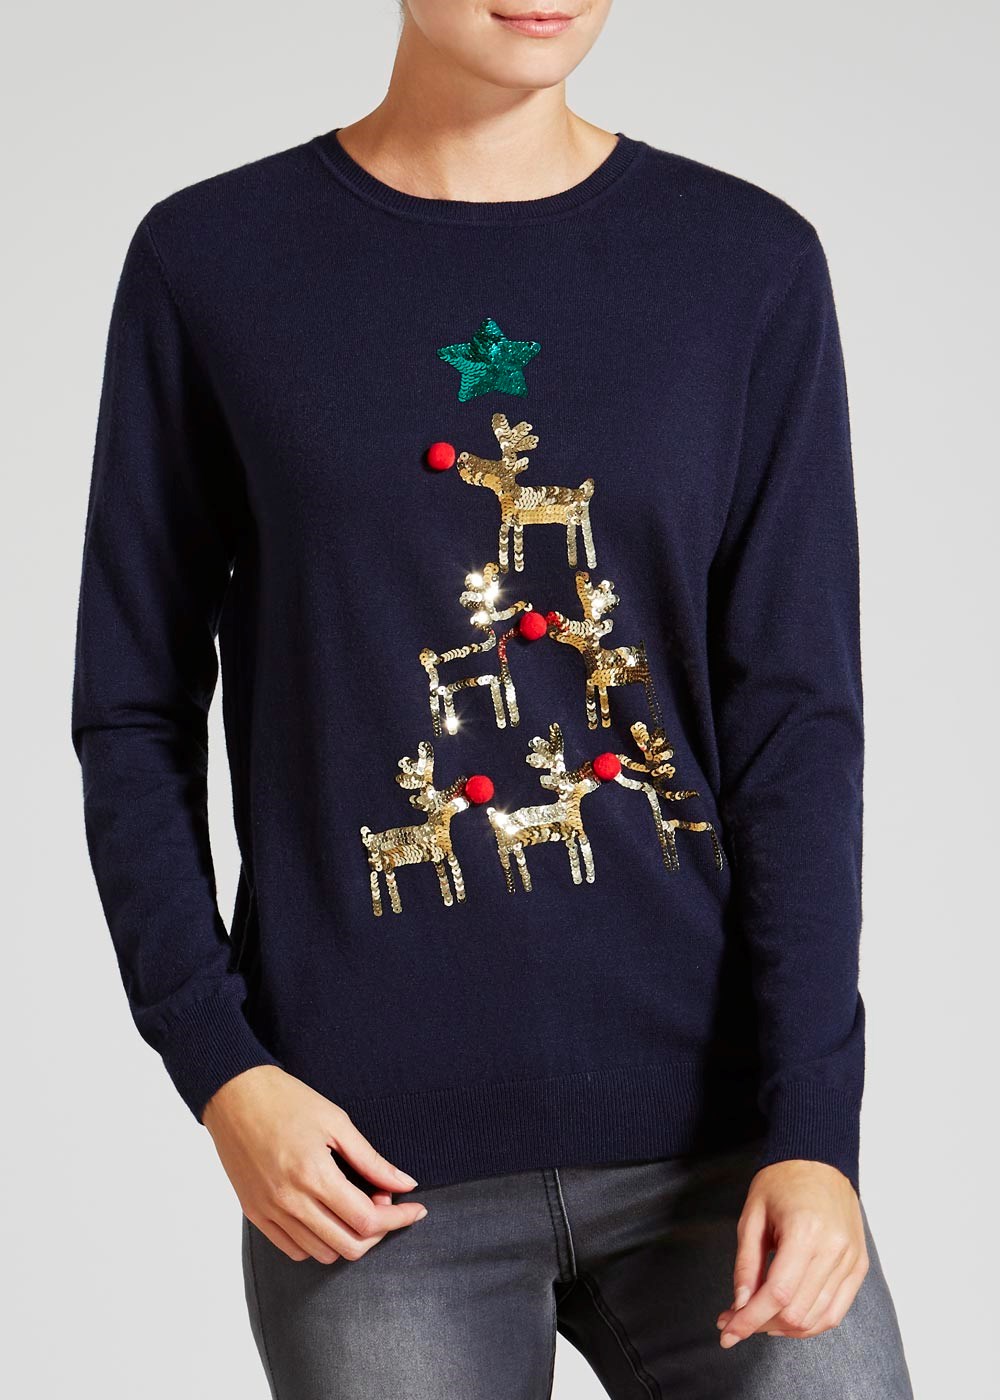 The 10 Best Christmas Jumpers of 2016